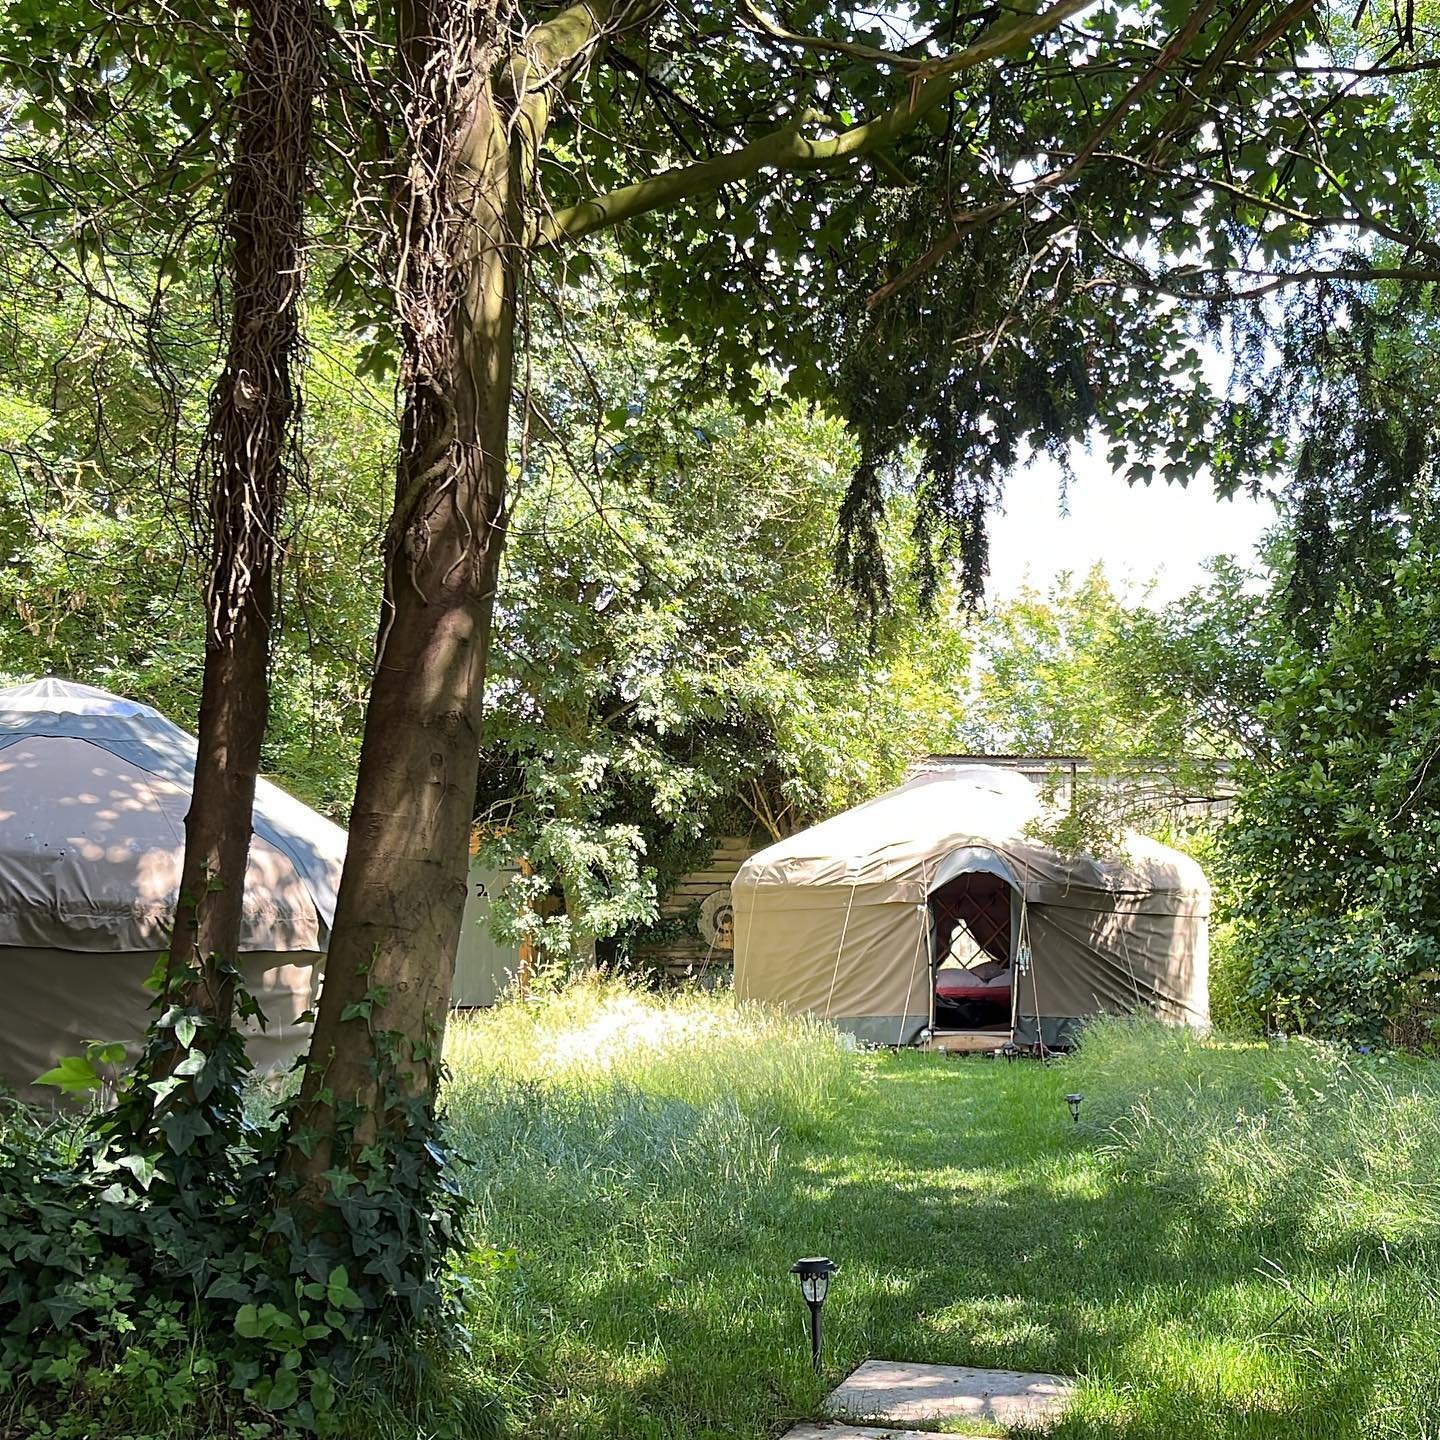 What a way to celebrate #midsummer #peace #tranquility #mindful #yurt #yurtlife #nordicstyle #nordicinspiration #nordicglamping #oxfordshire #yurthire interested in a yurt stay, hire or purchase? Details via links in our bio